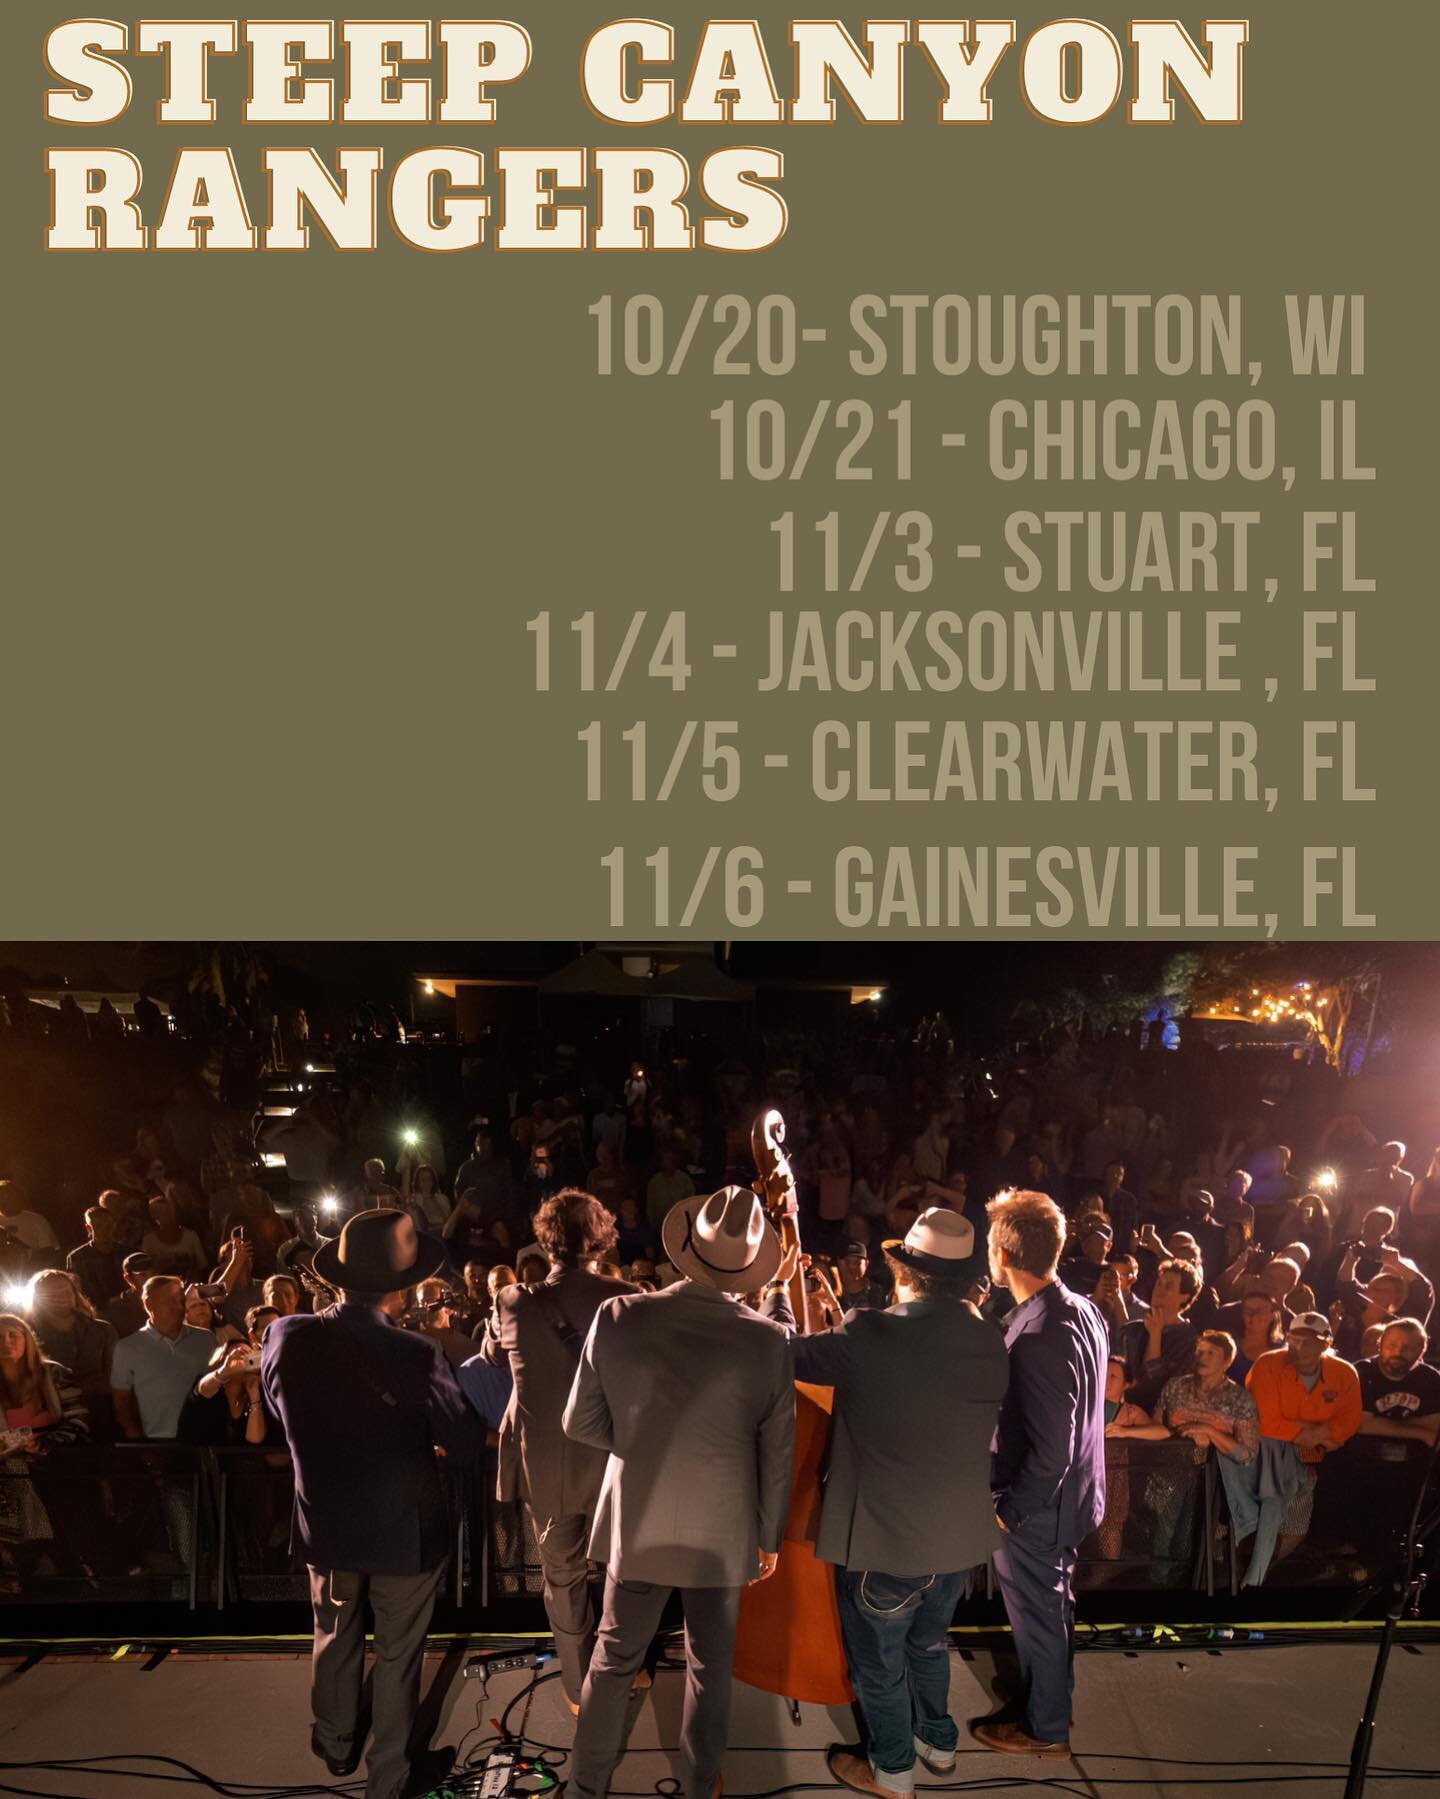 Catch us soon in the Midwest or Florida! 

More info and tickets at the link in our bio. 

@stoughtonoperahouse 
@oldtownschool 
@liveatthelyric 
@floridatheatre 
@bilheimercap 
@ufperformingarts 

#steepcanyonrangers #tour #morningshift #goingmidwes